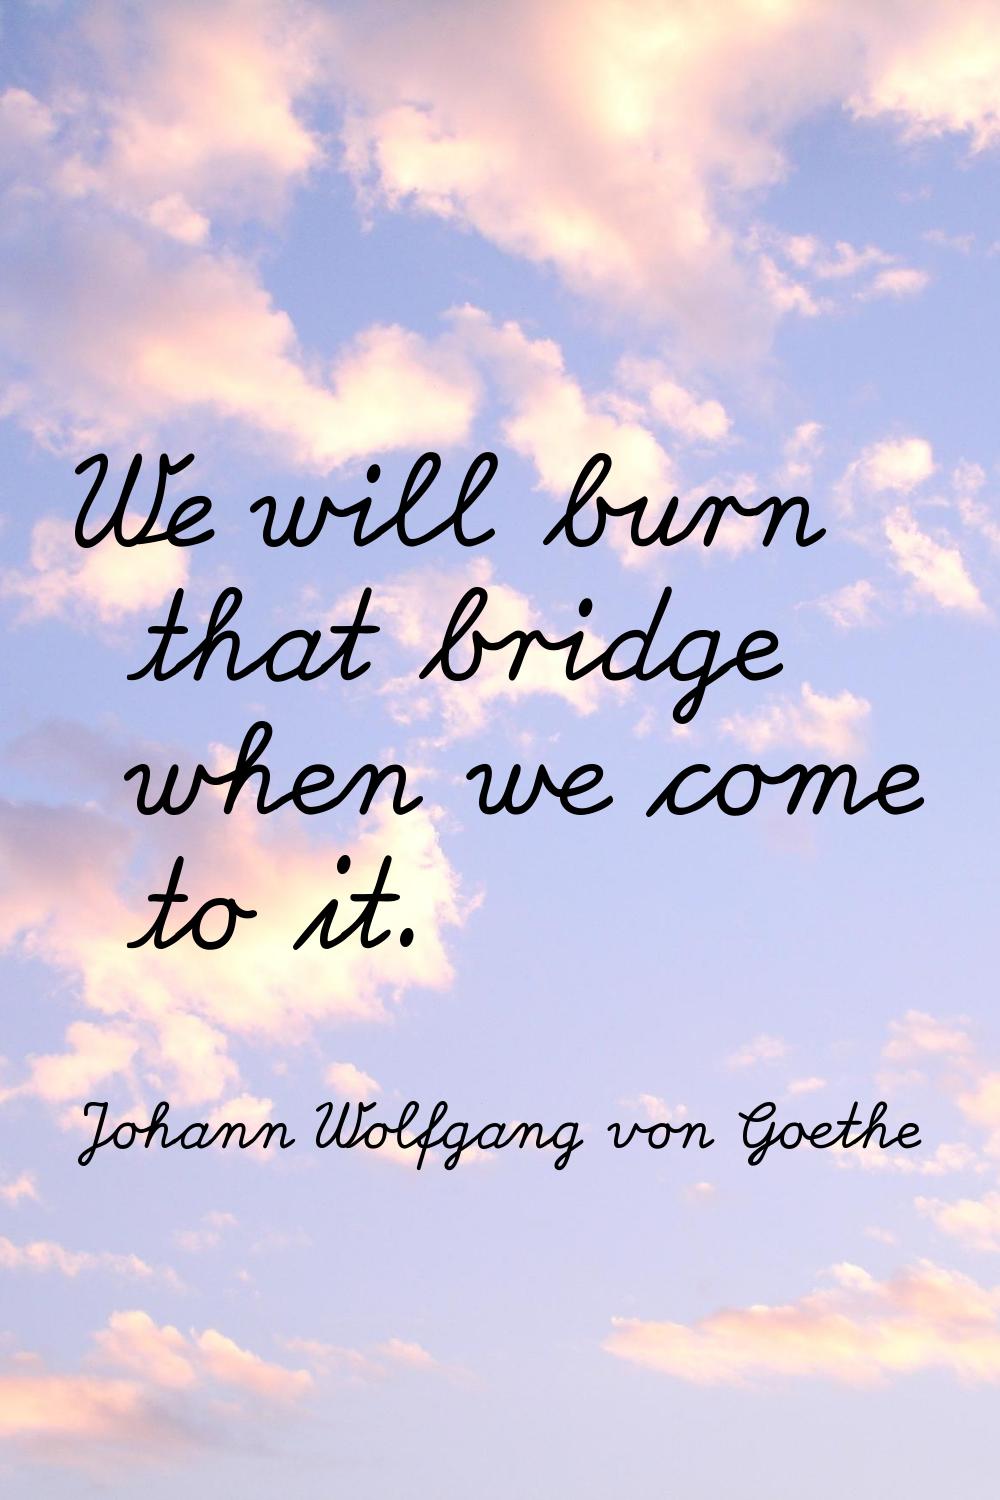 We will burn that bridge when we come to it.